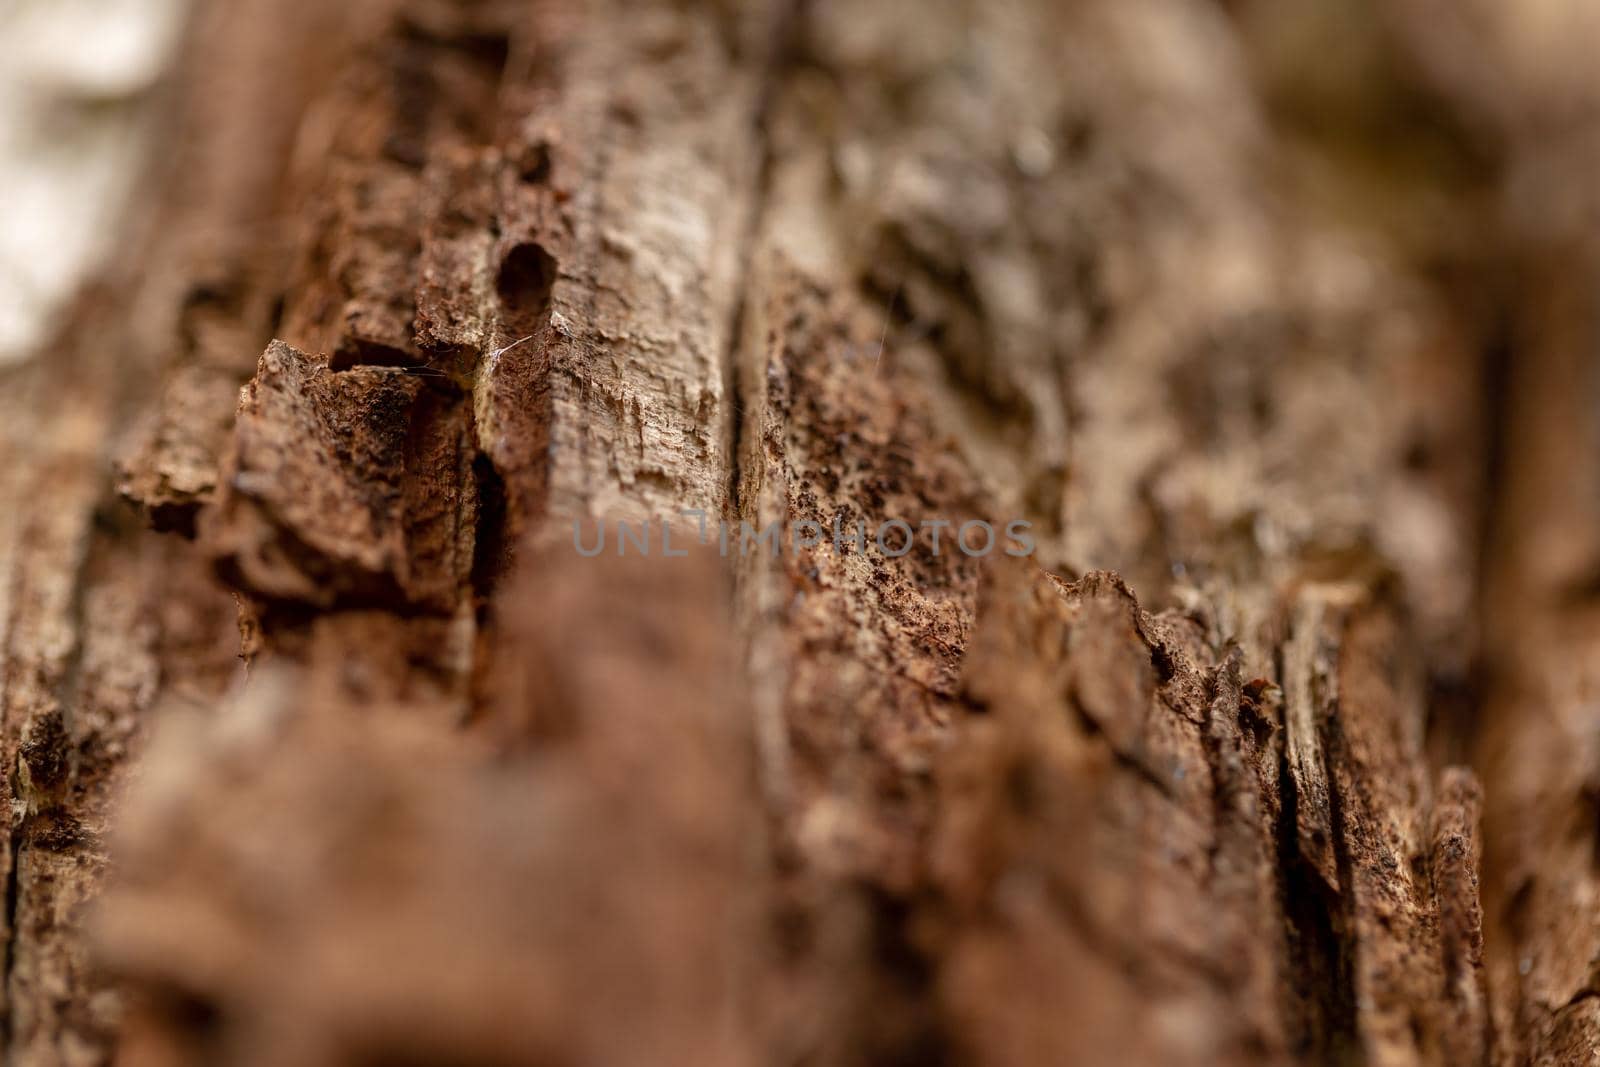 Close up old bark tree texture. Macro view. Looks like a rock for mountaineering